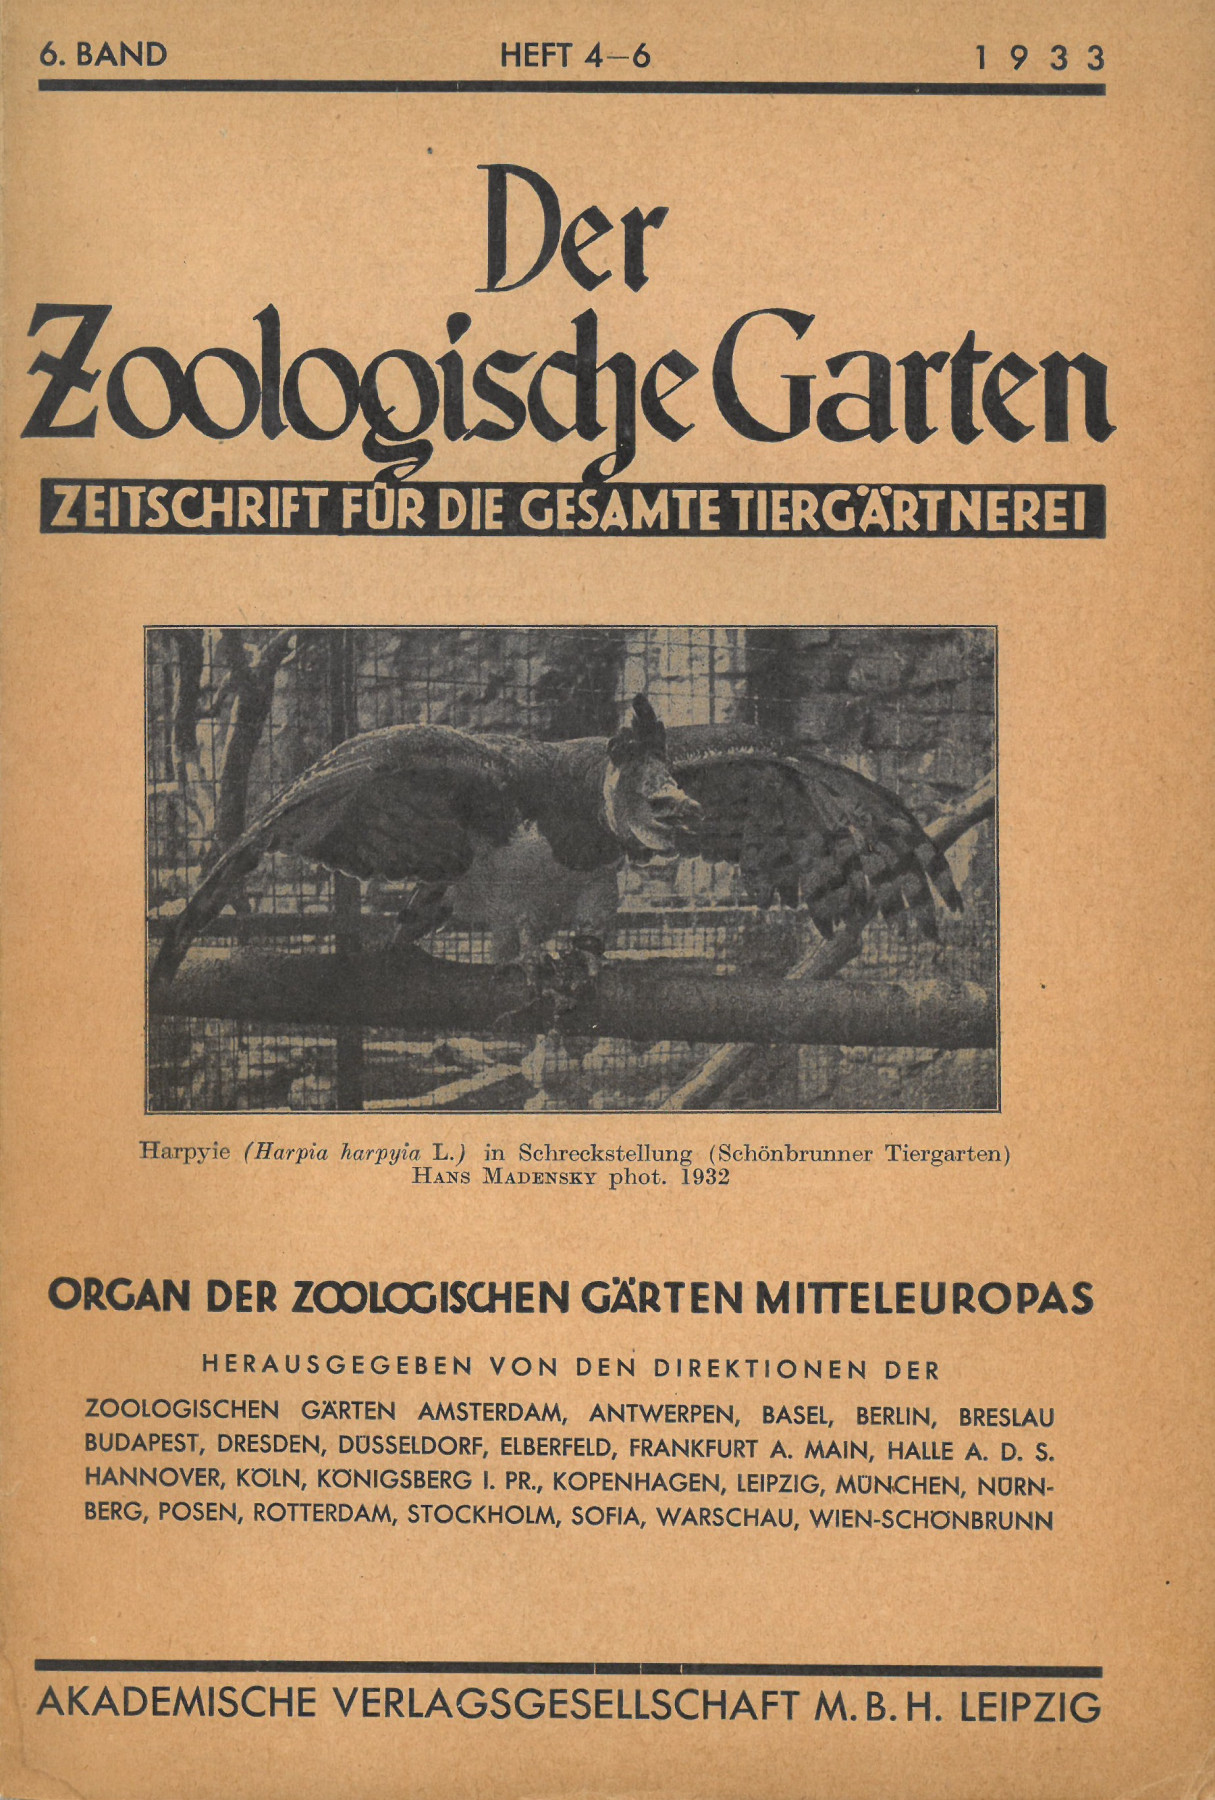 Cover page of Der Zoologische Garten with photograph of a harpy